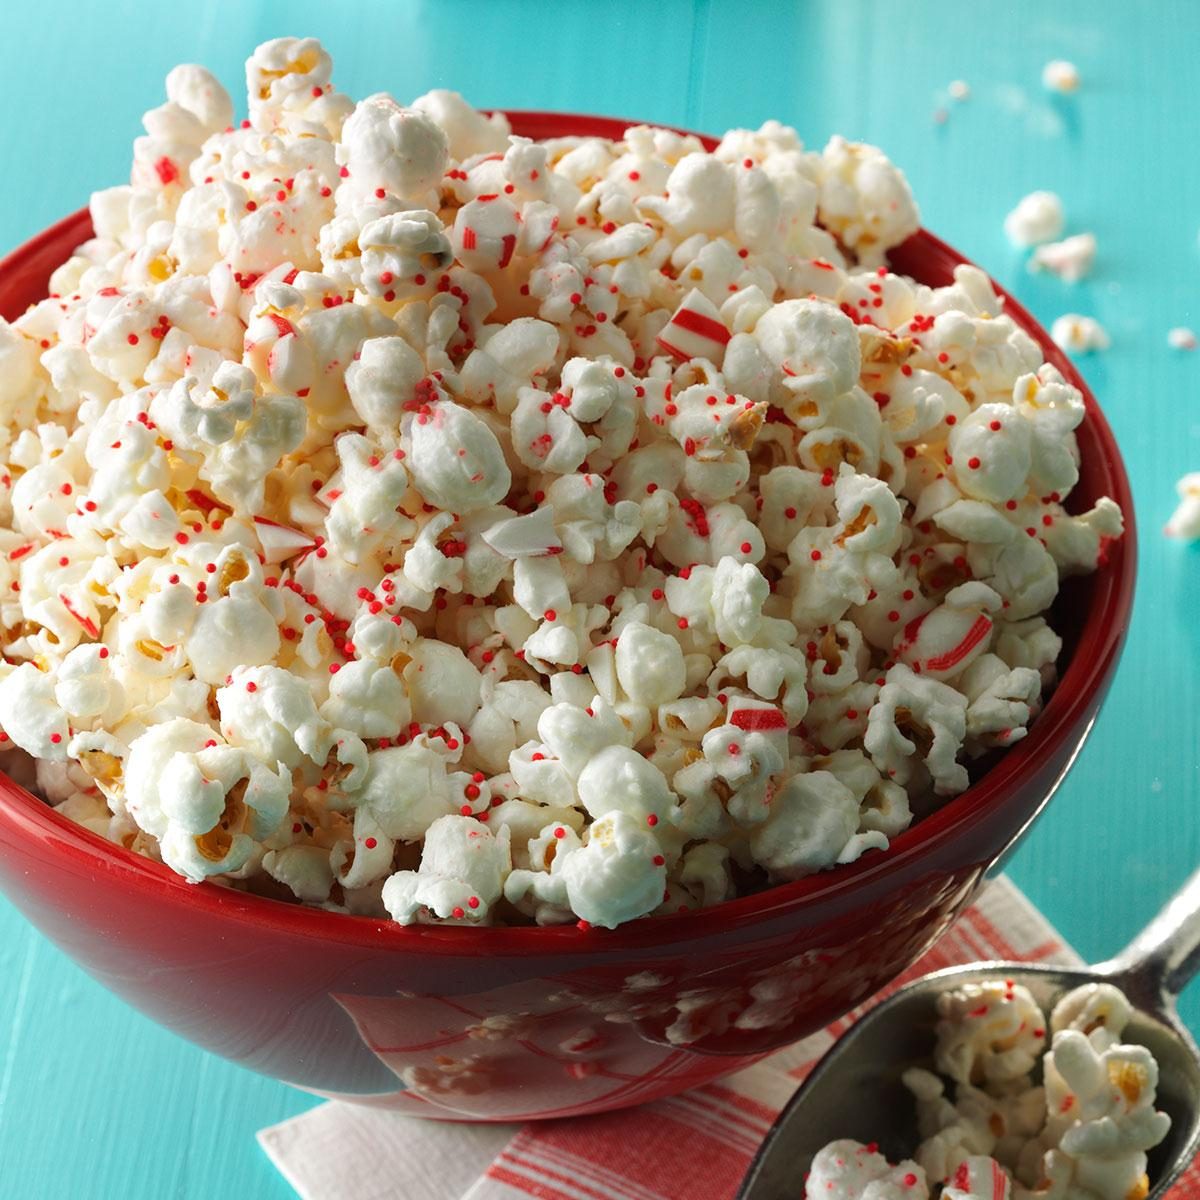 Inspired by: Angie’s BOOM CHICKA POP White Chocolate & Peppermint Flavored Kettle Corn